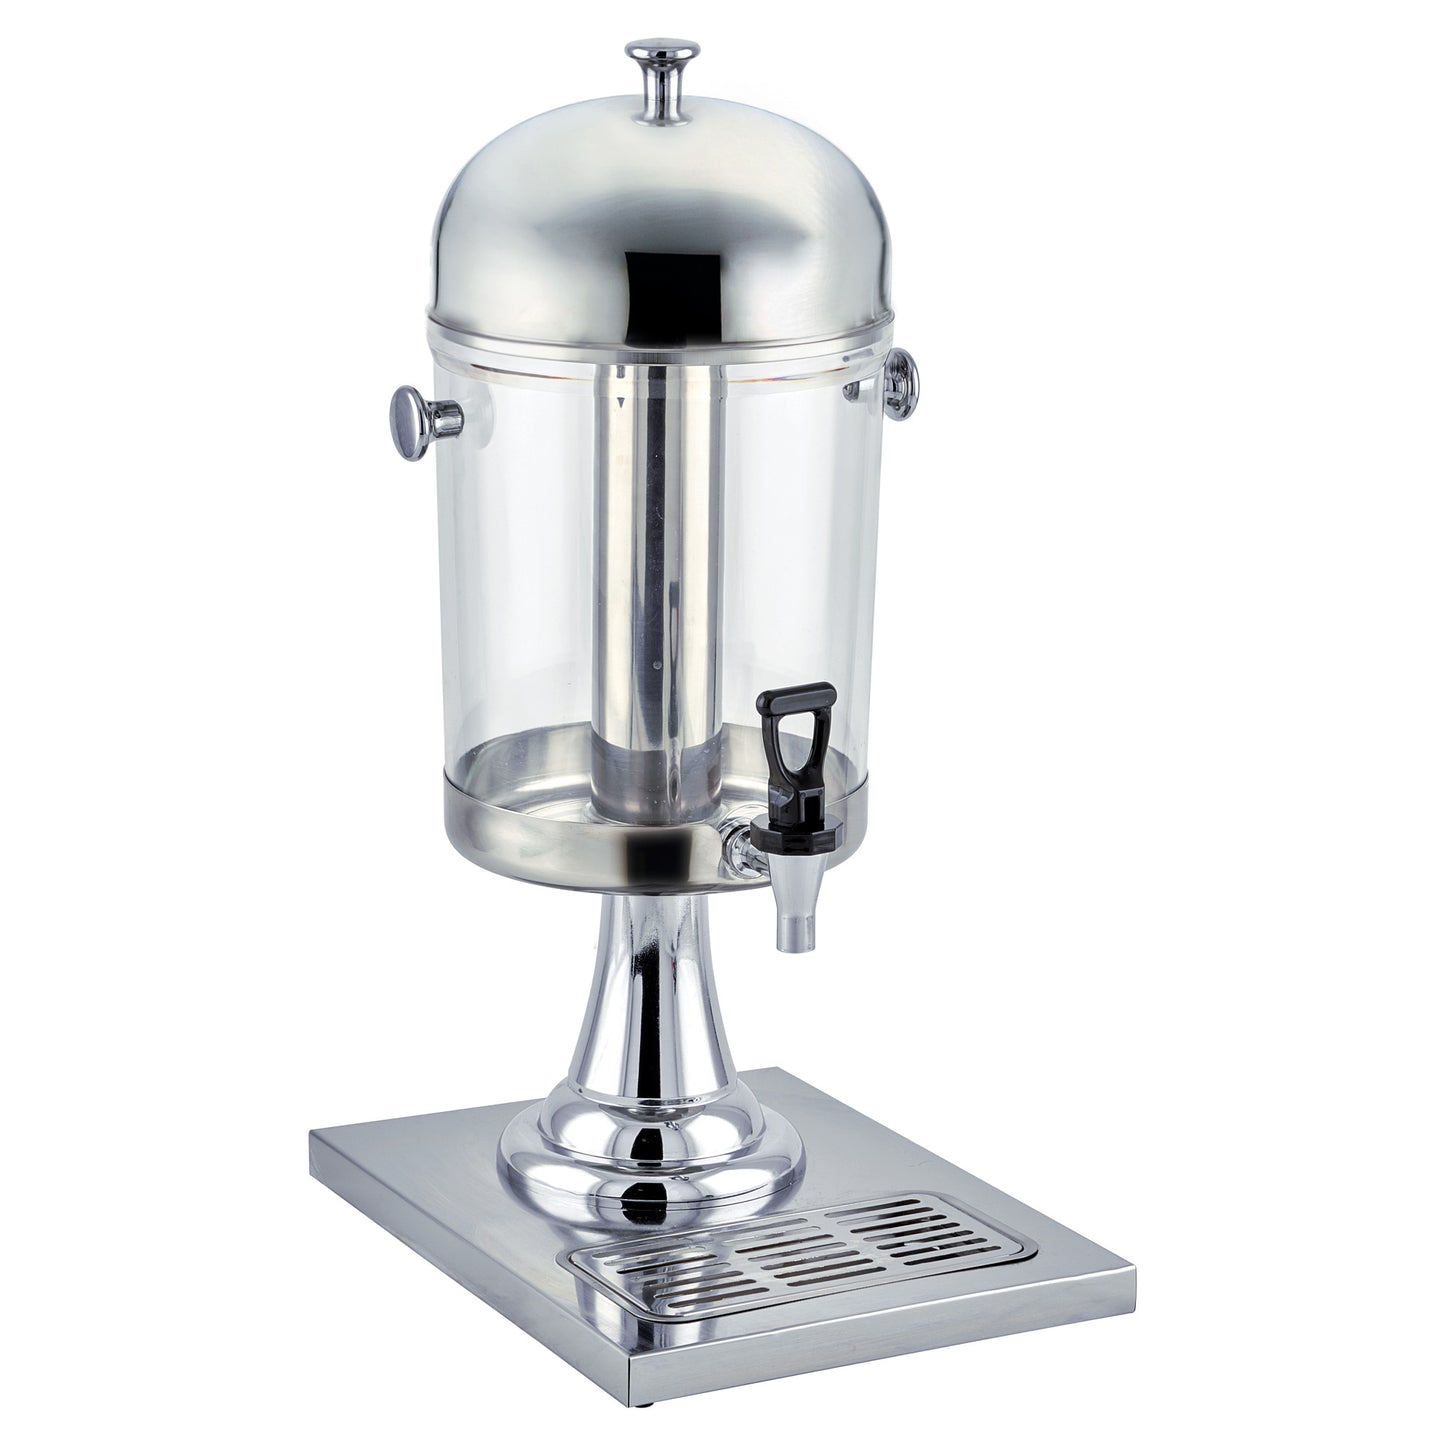 902 - Pedestal Juice Dispenser with Ice Core - 2.2 Gallons